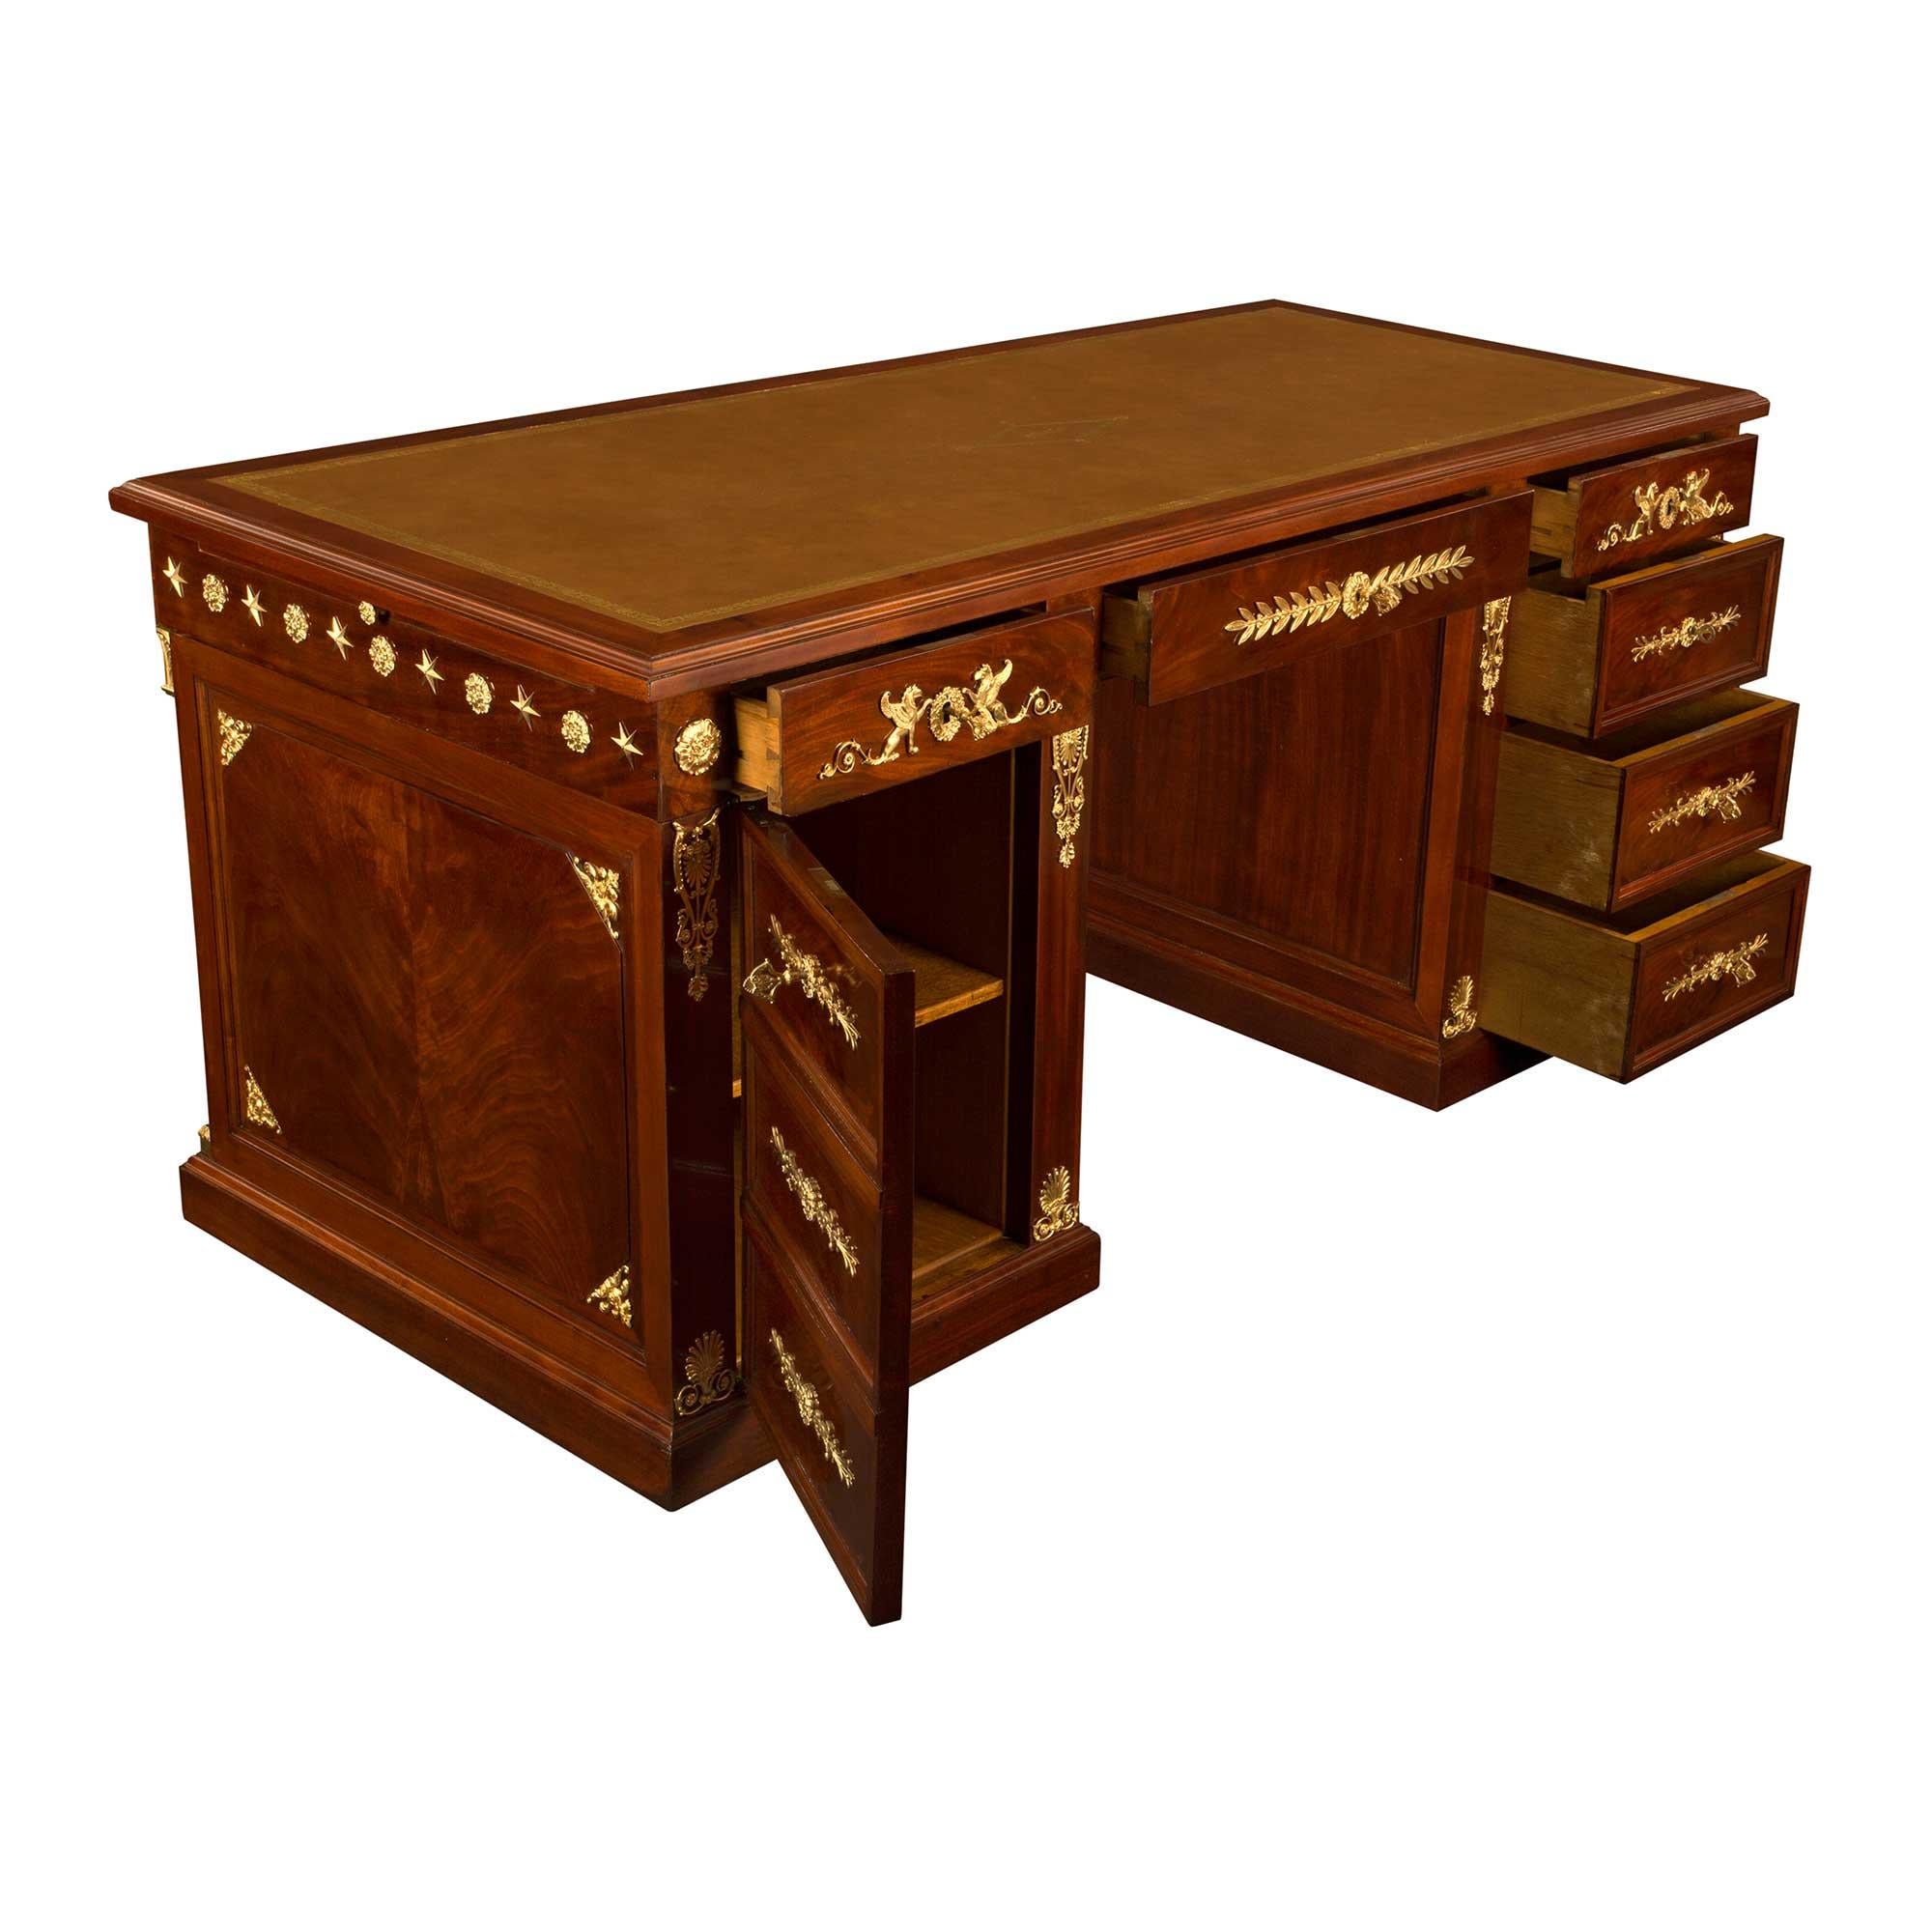 French 19th Century Empire St. Mahogany and Ormolu Executive Desk For Sale 1